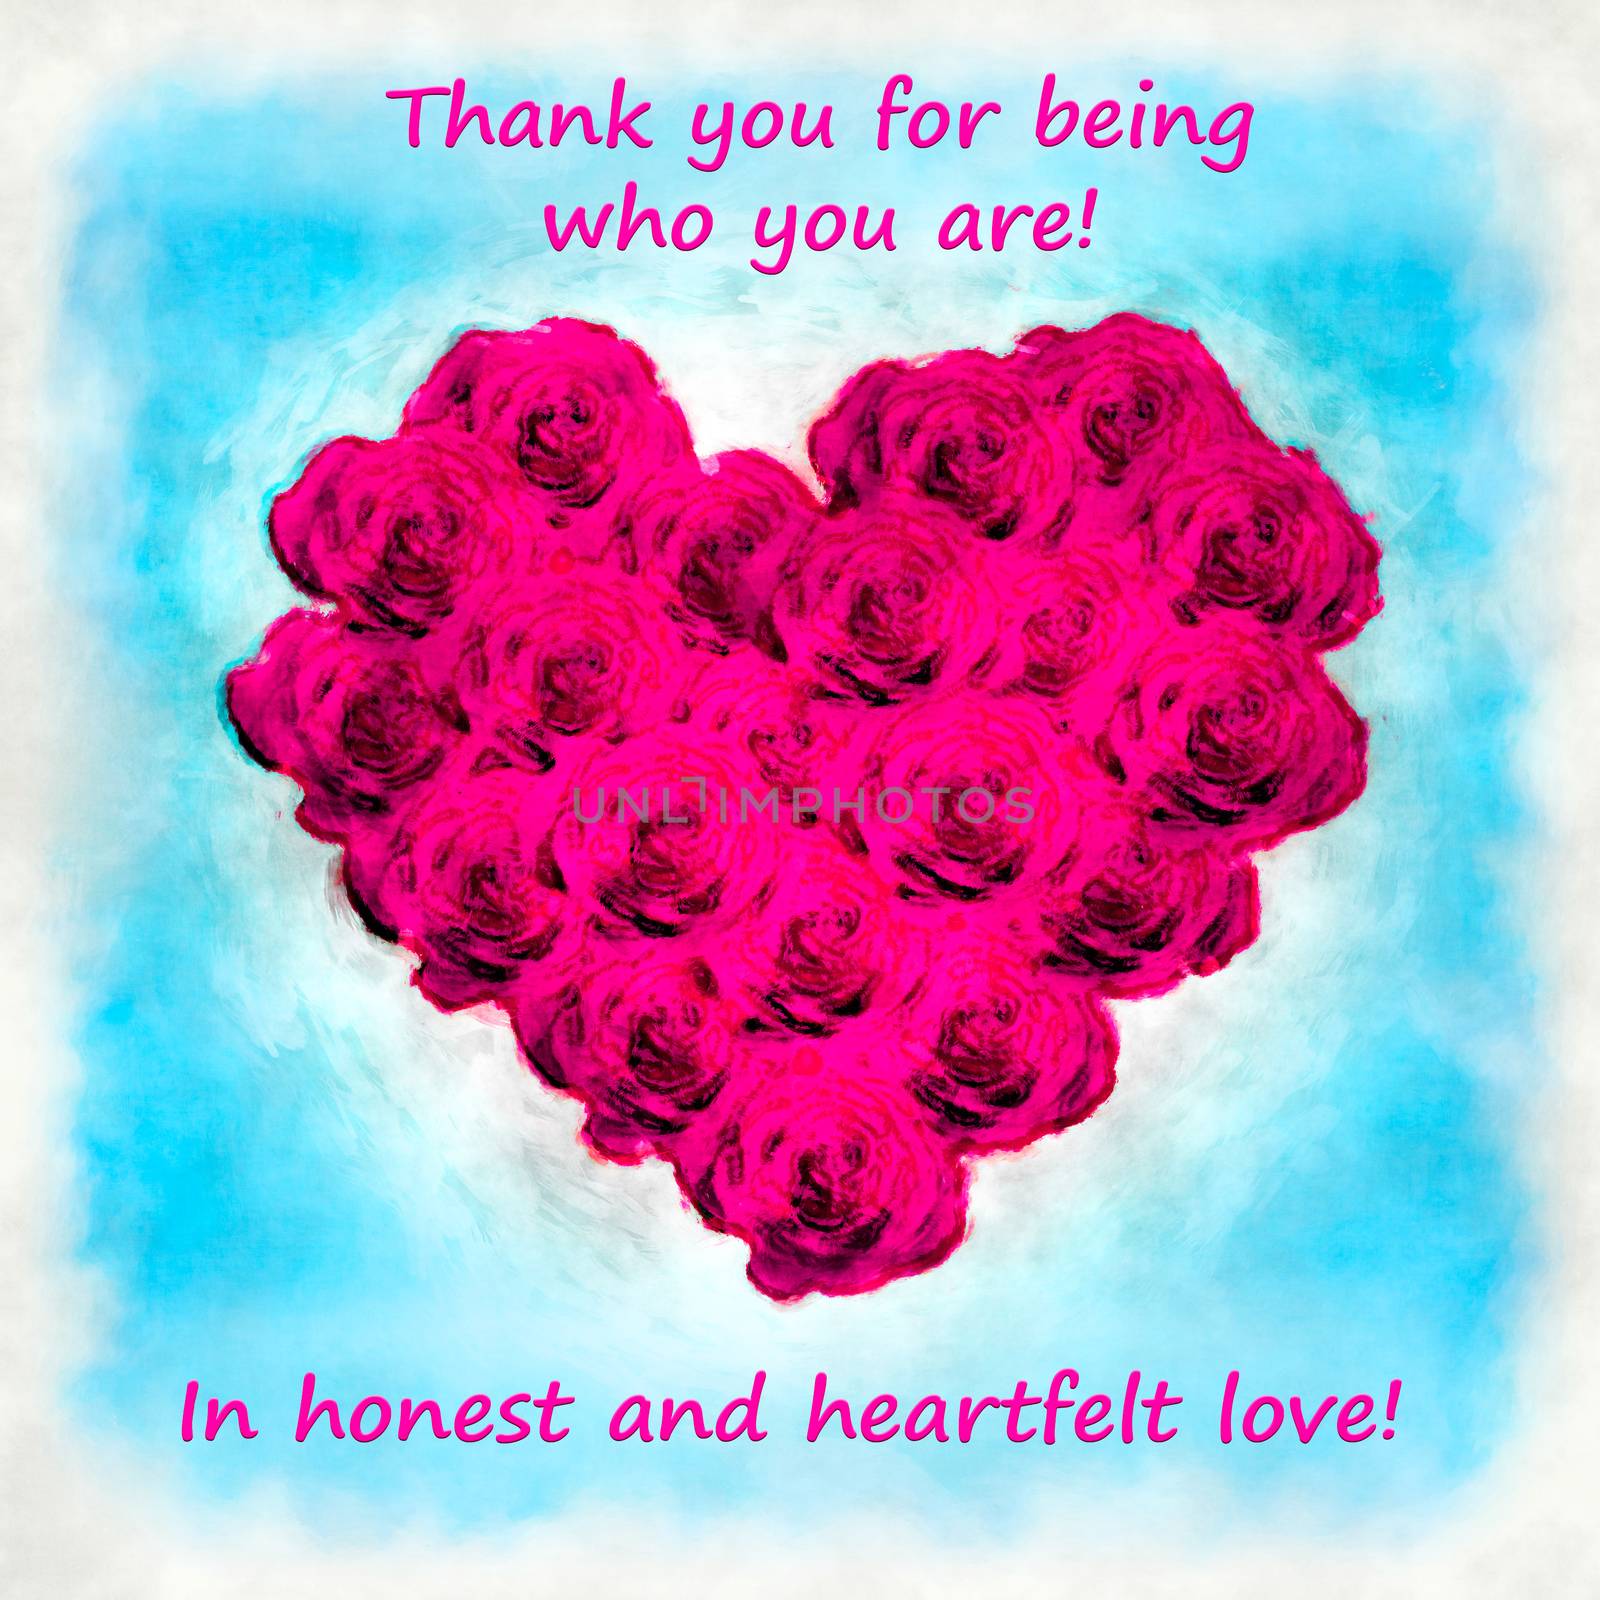 Illustration with heart of roses and text Thank you for being whow you are - In honest and heartfelt love